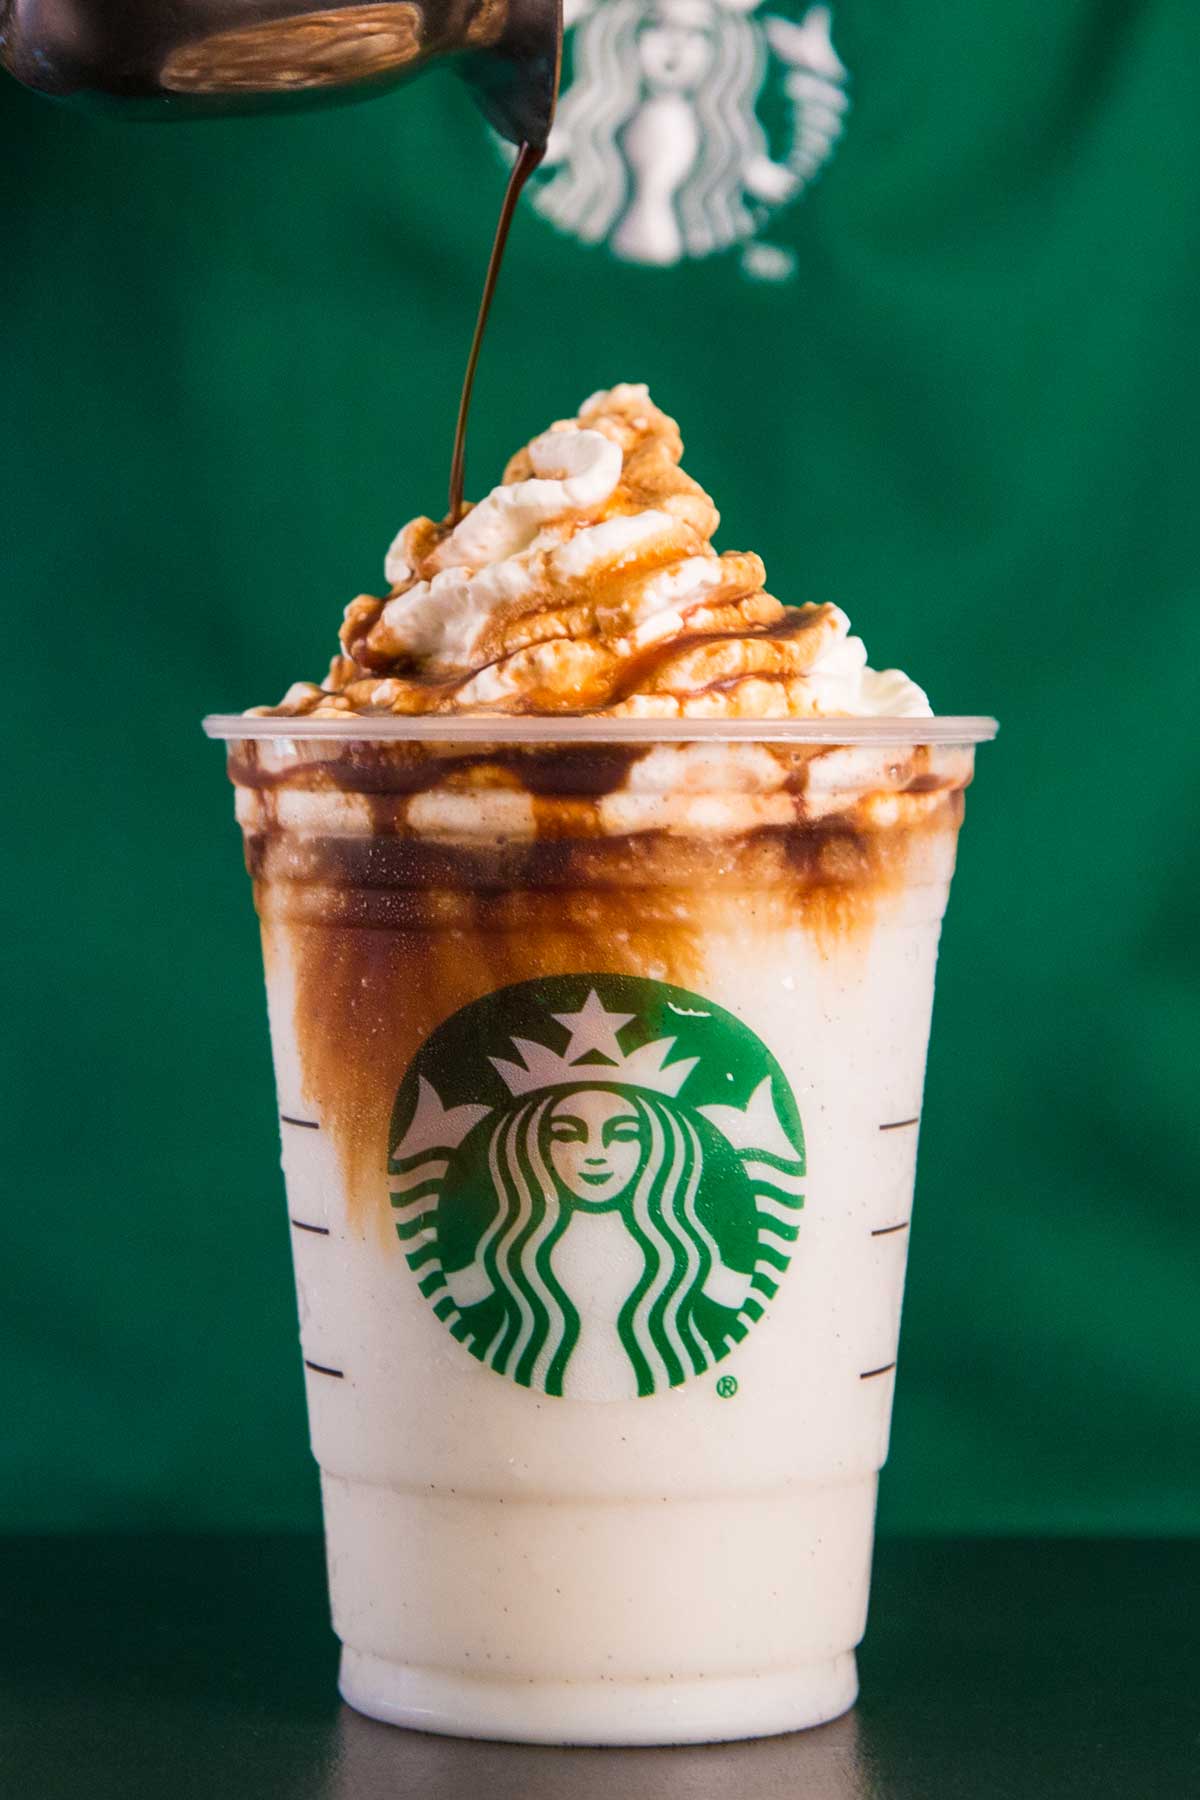 Pouring chocolate sauce on top of a Starbucks drink with whipped cream.